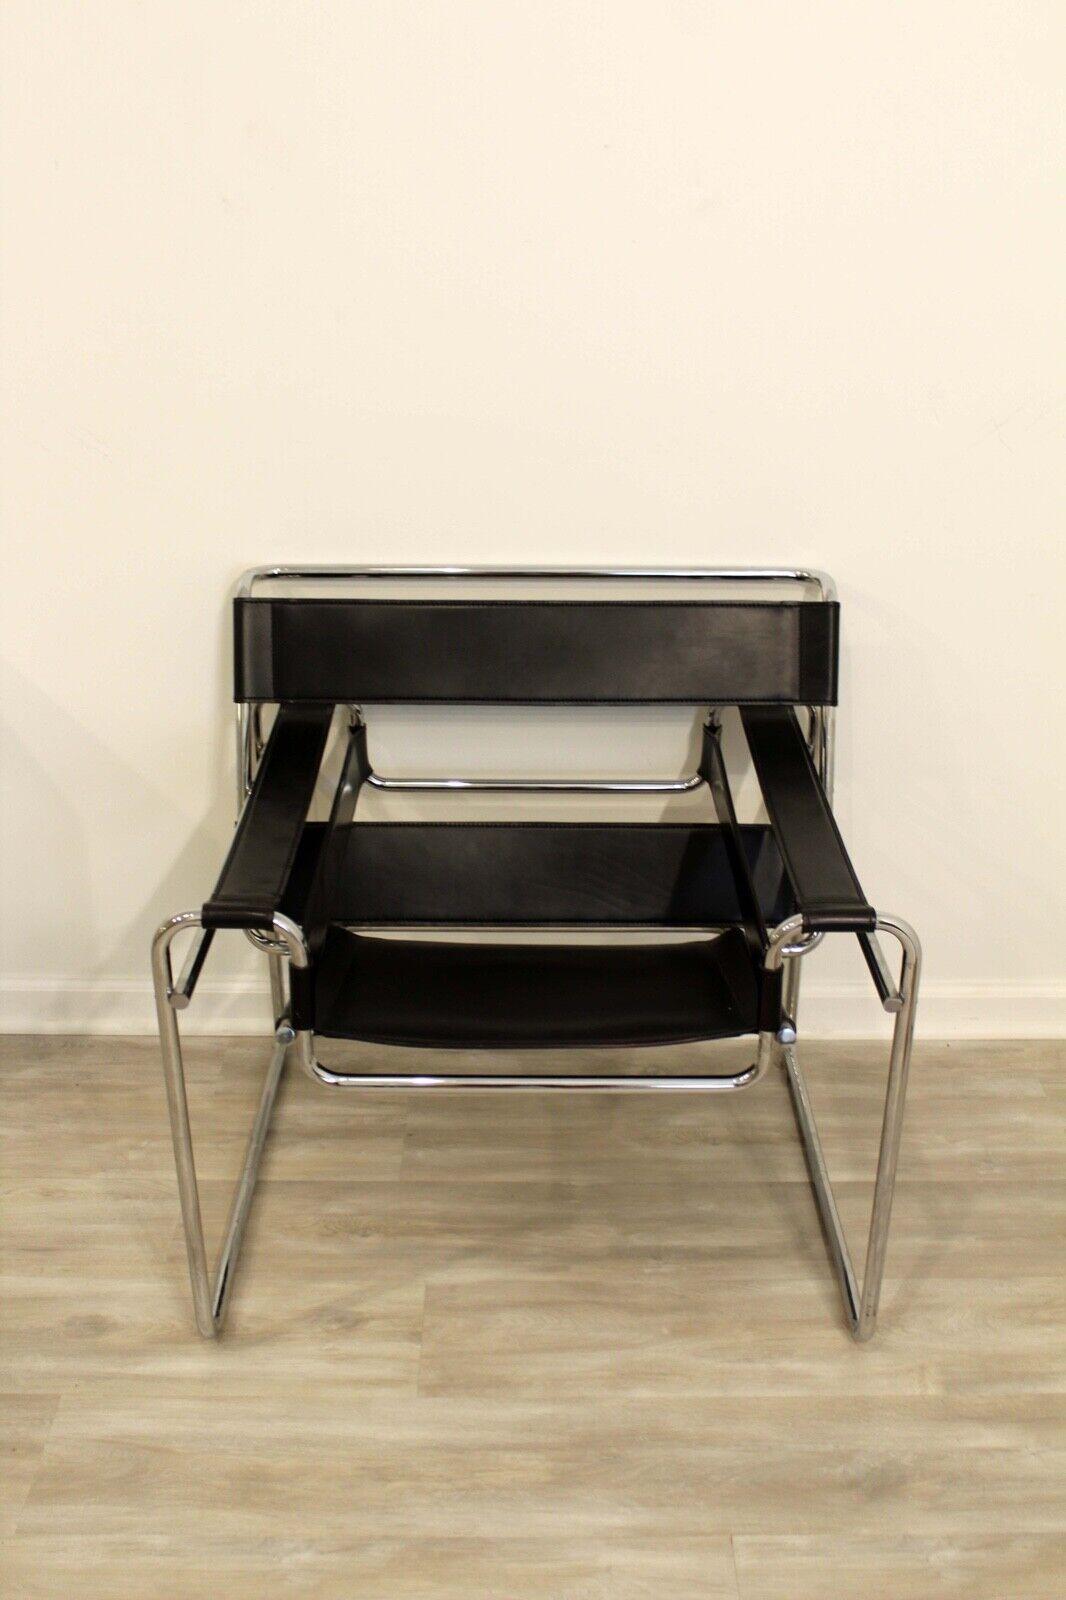 We present an authentic authorized reproduction of the classic wassily chair. In excellent condition. Dimensions: 30.5